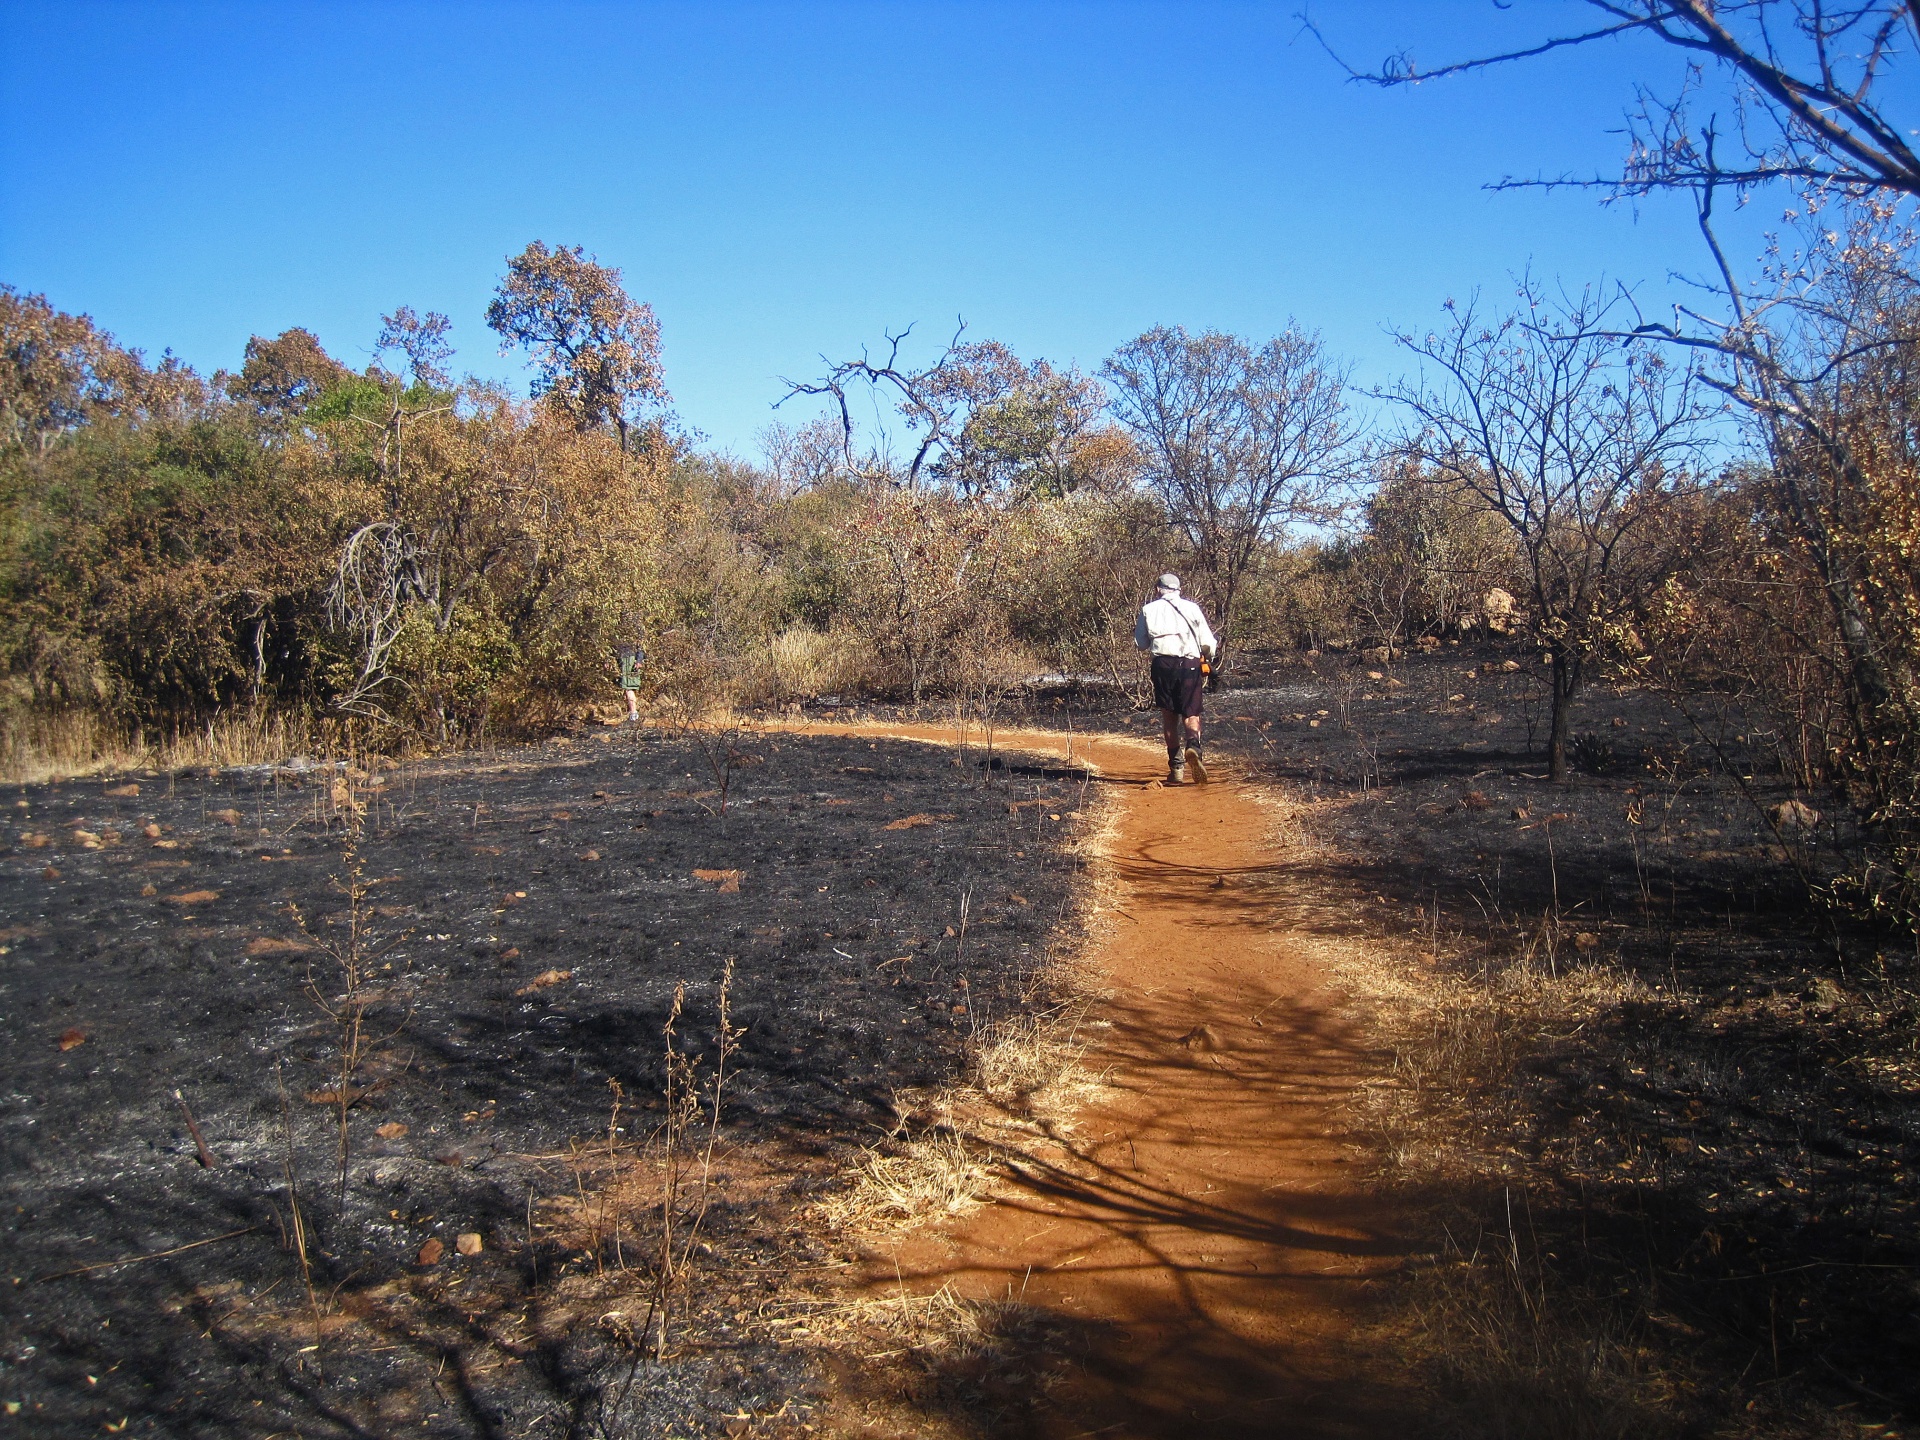 Hiker On A Trail With Burnt Grass